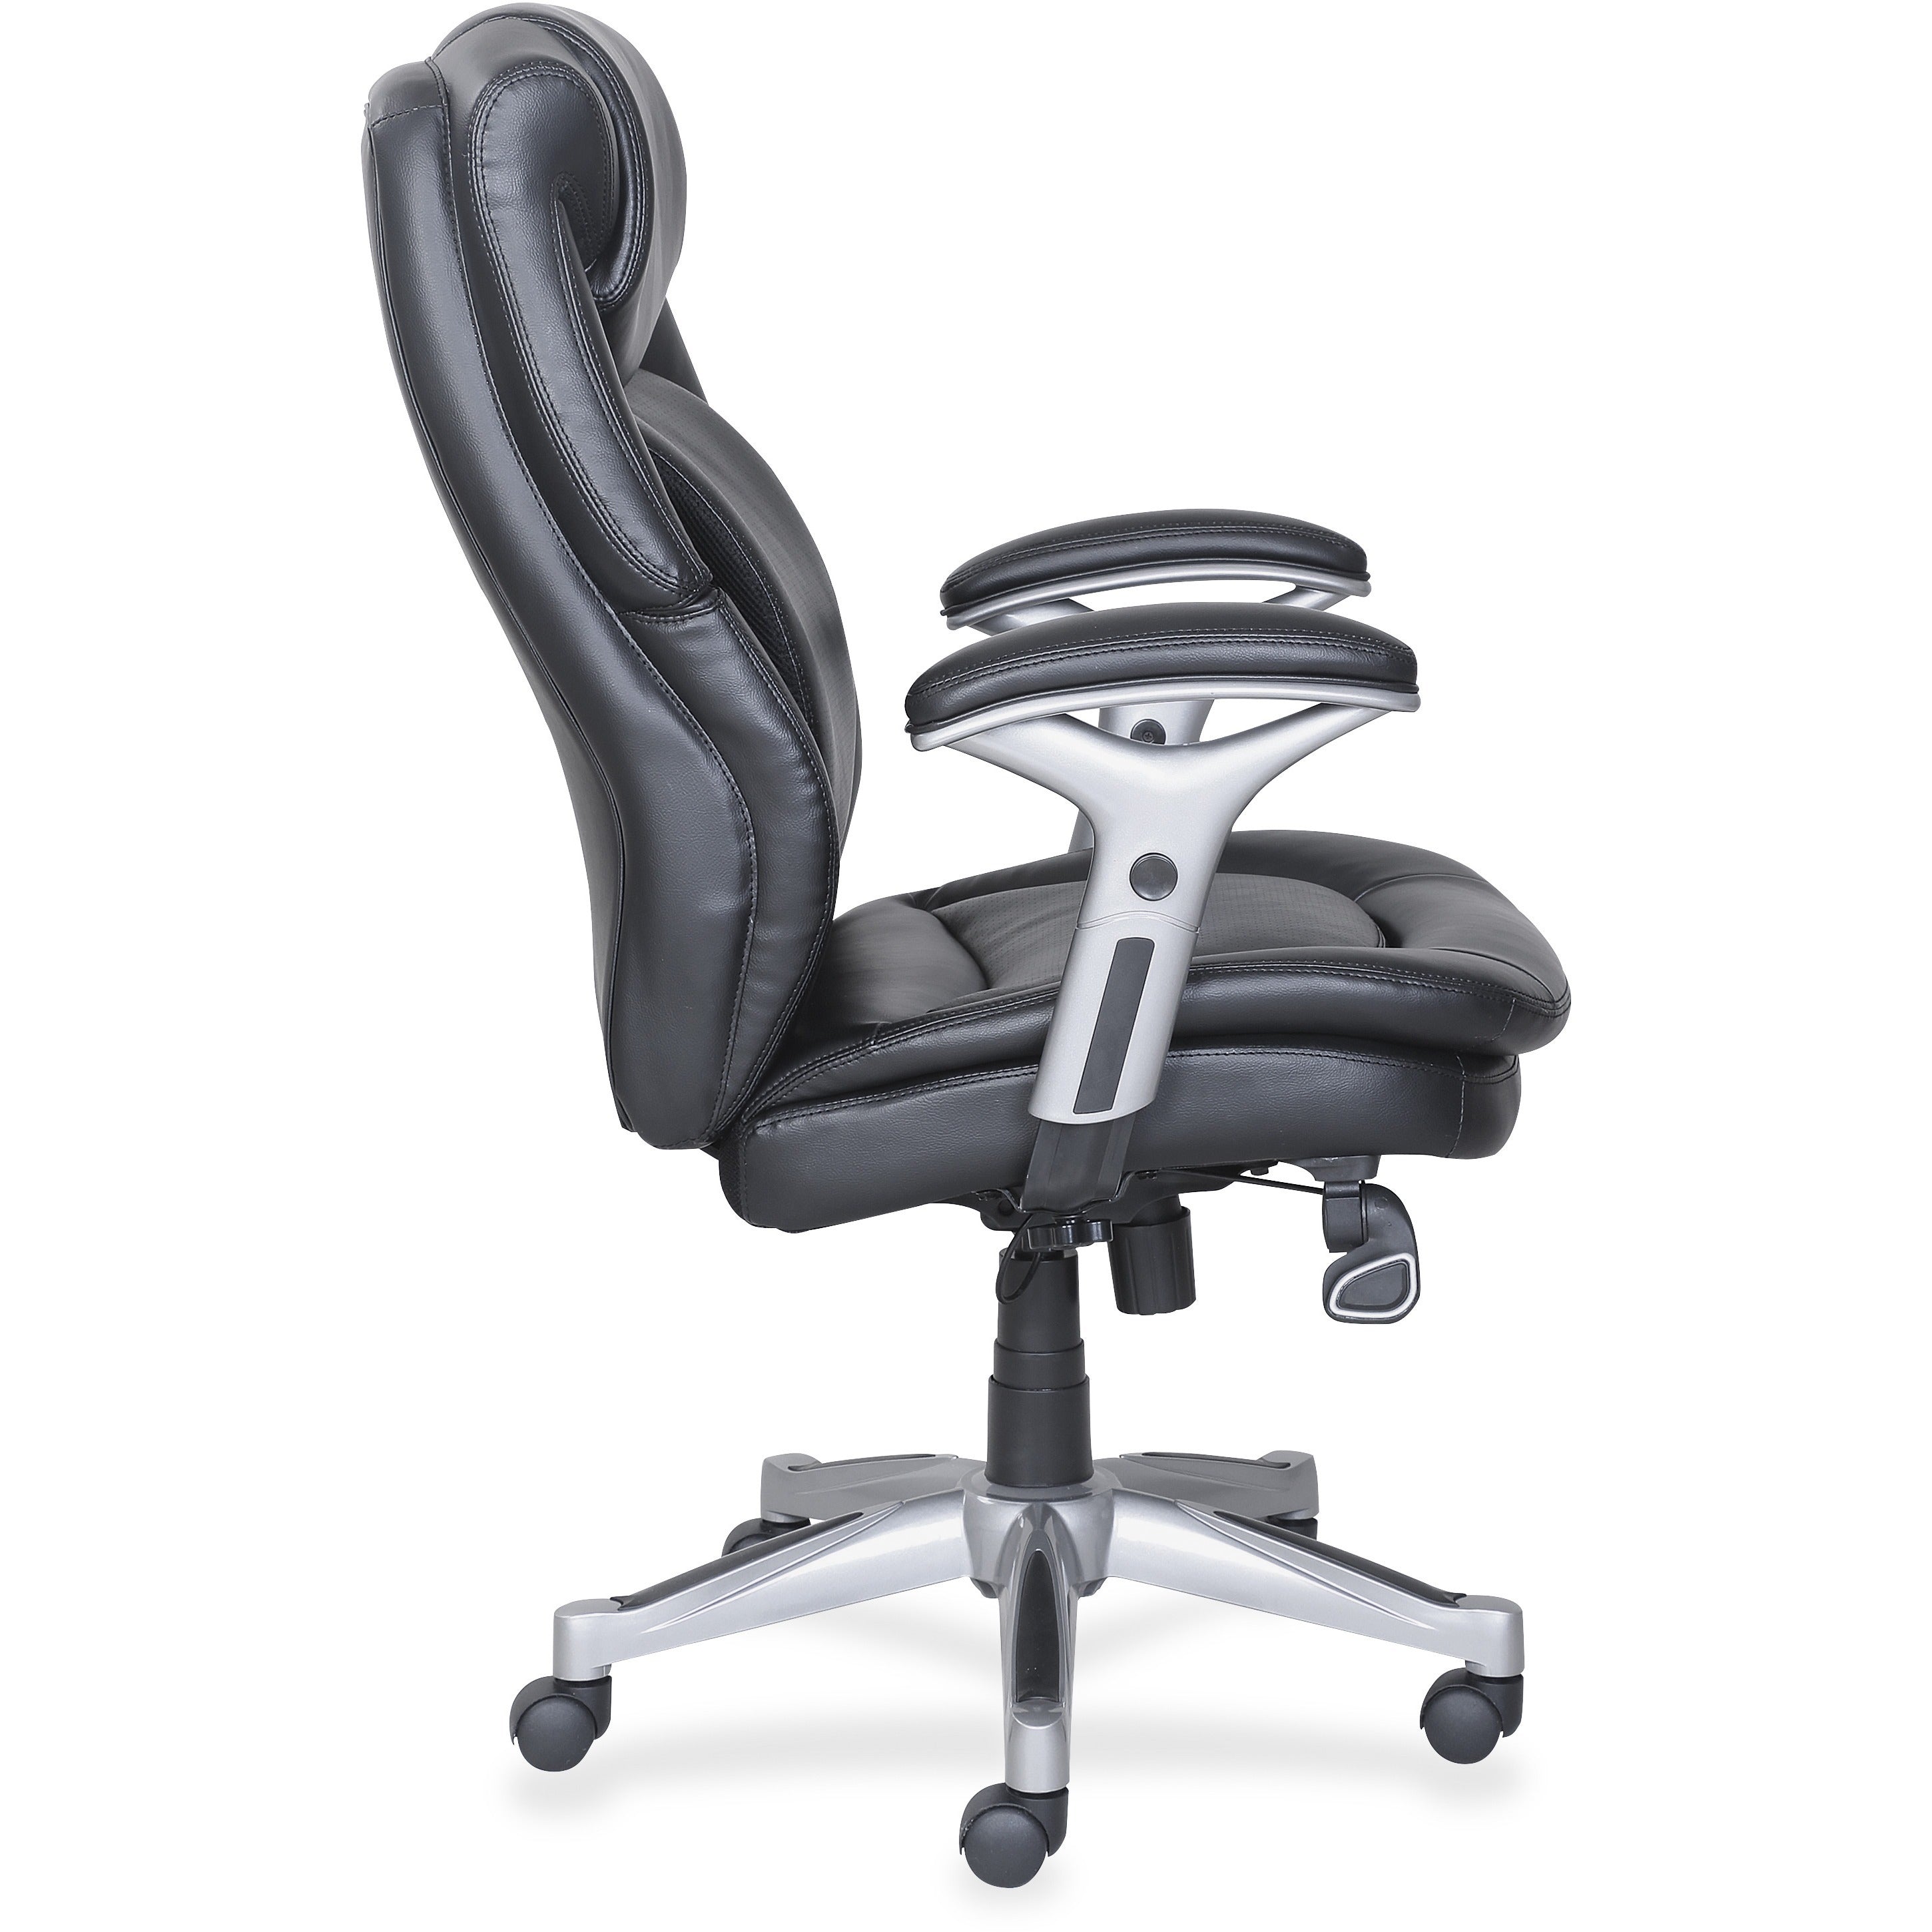 lorell-wellness-by-design-executive-office-chair-black-bonded-leather-seat-black-bonded-leather-back-high-back-5-star-base-armrest-1-each_llr47920 - 2